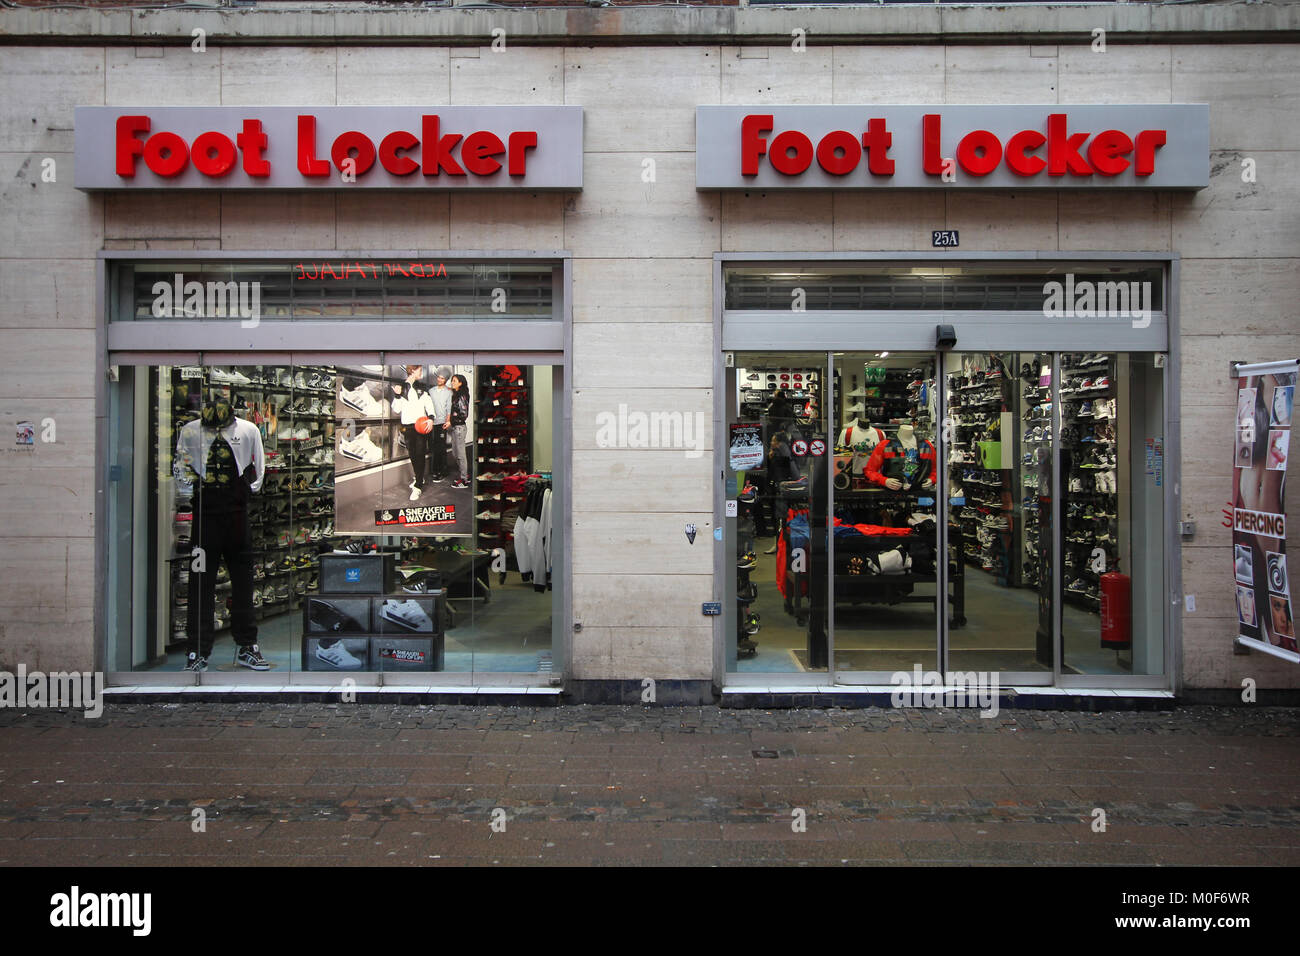 COPENHAGEN - MARCH 10: Foot Locker store on March 10, 2011 in Copenhagen, Denmark. With almost 4000 stores it is the largest multibrand athletic footw Stock Photo